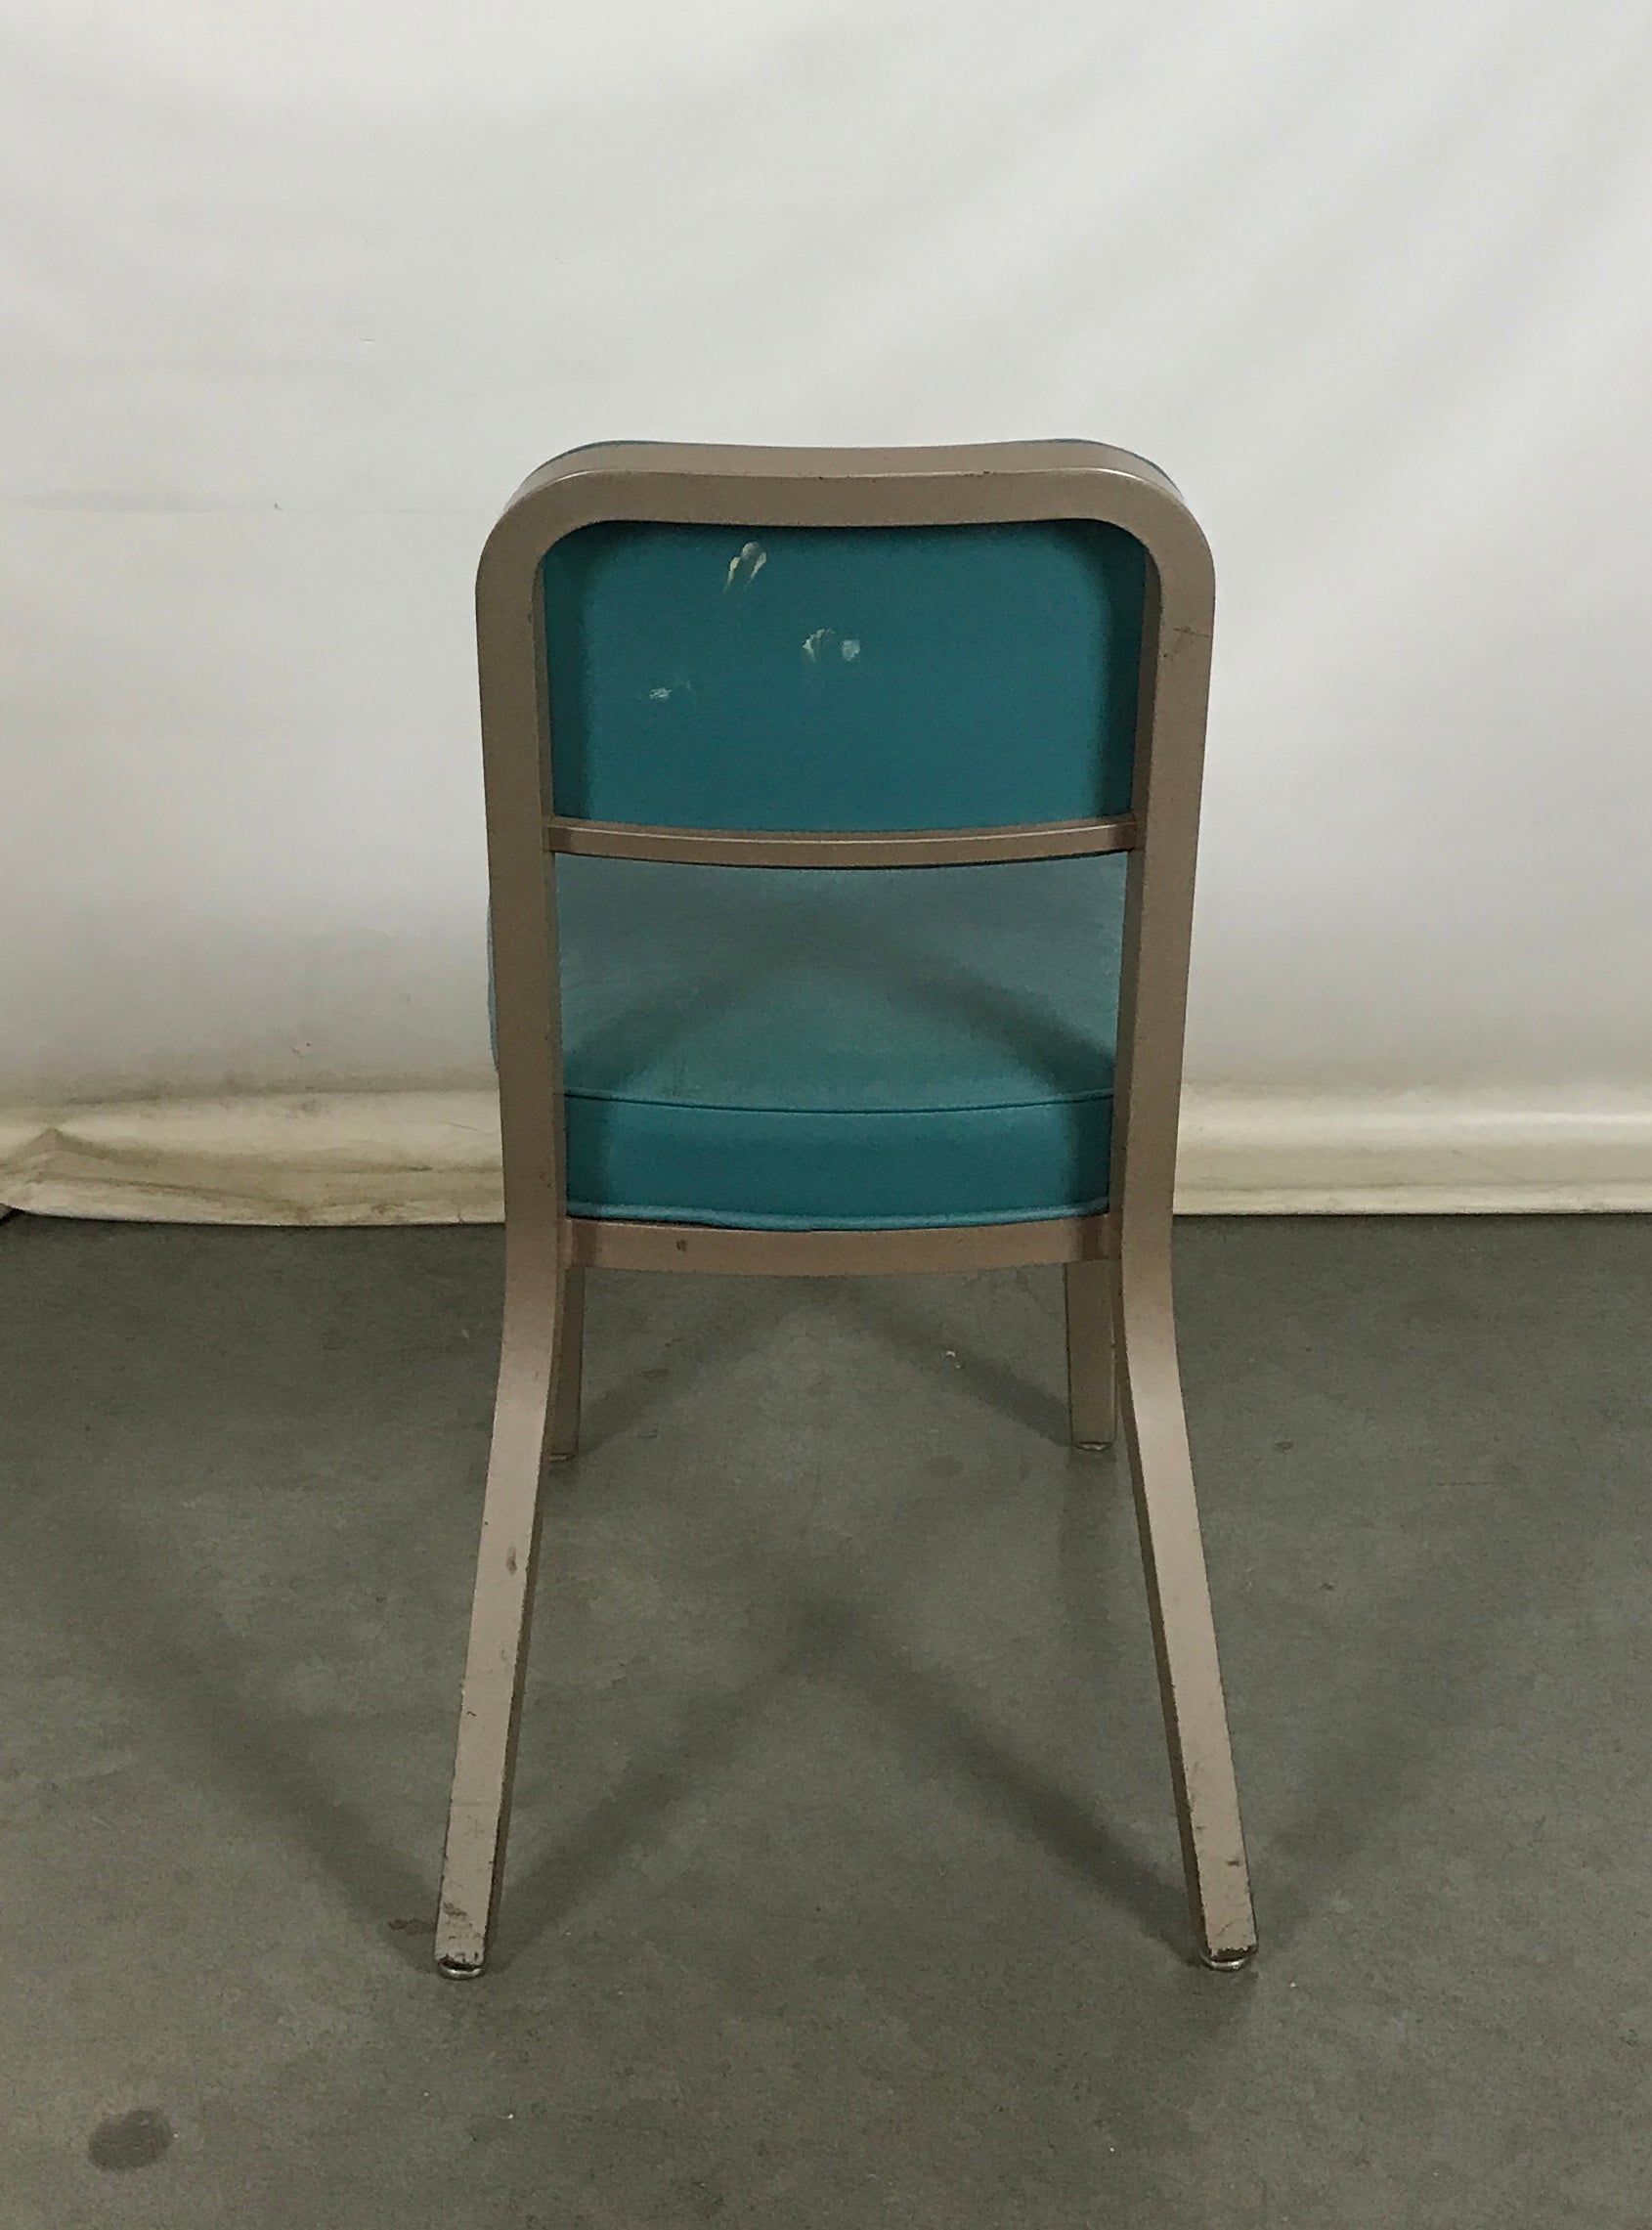 Steelcase Teal and Gray Chair